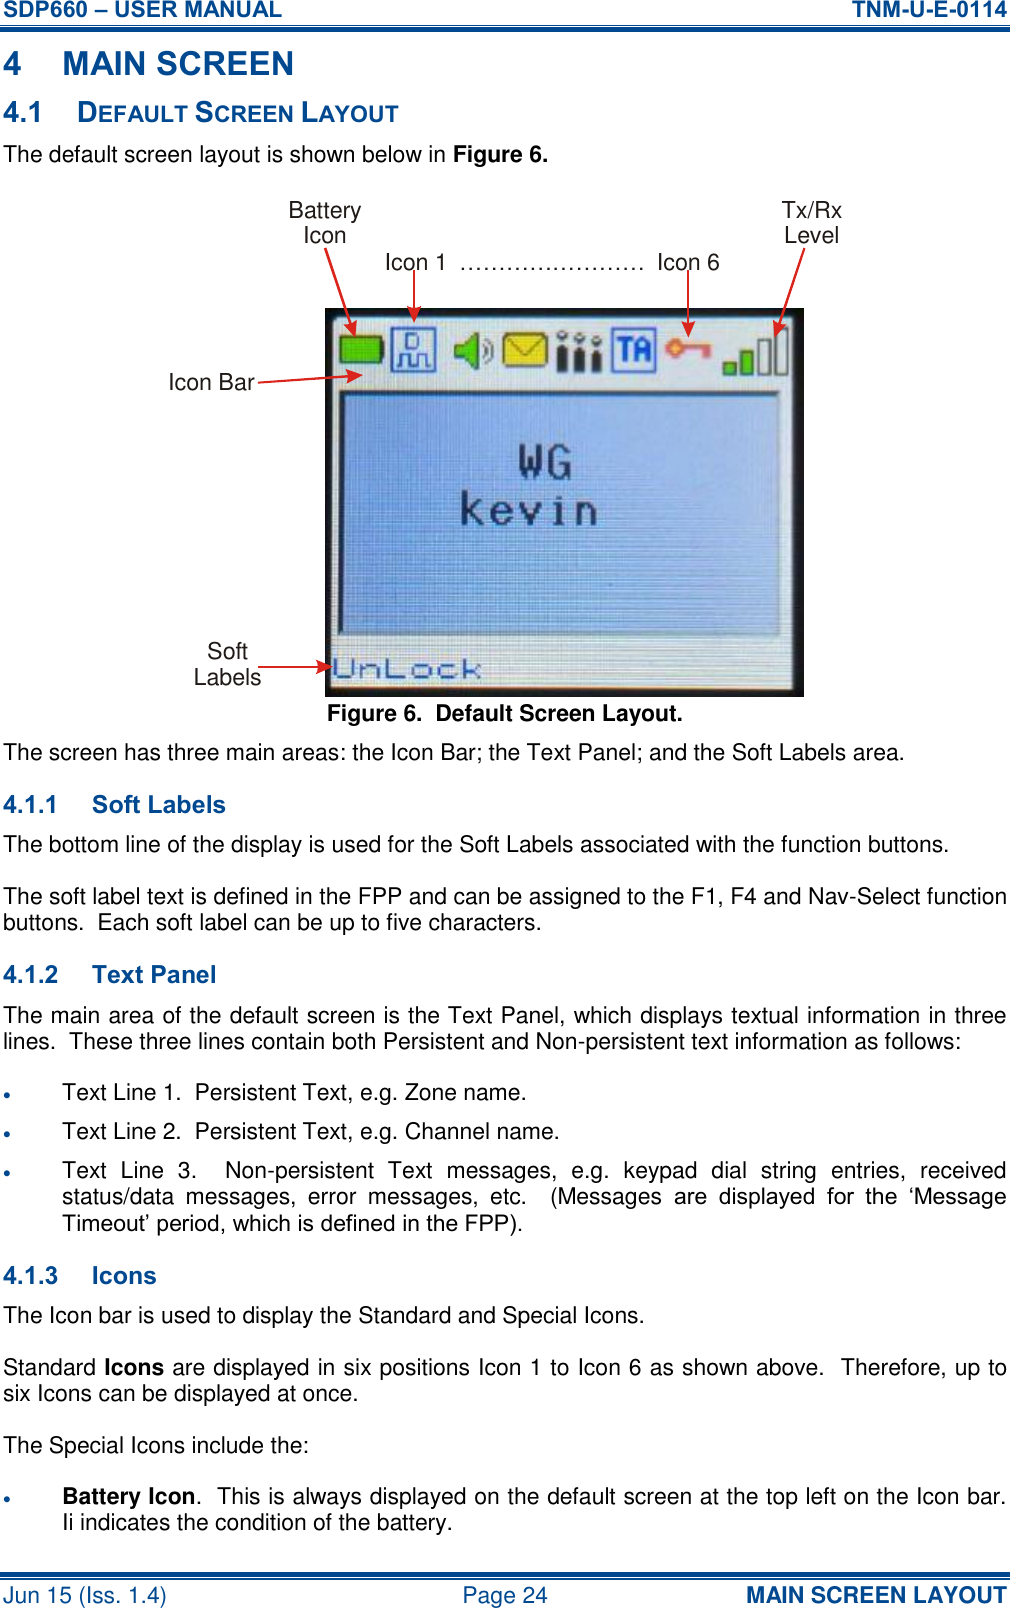 SDP660 – USER MANUAL  TNM-U-E-0114 Jun 15 (Iss. 1.4)  Page 24 MAIN SCREEN LAYOUT 4 MAIN SCREEN 4.1 DEFAULT SCREEN LAYOUT The default screen layout is shown below in Figure 6. Figure 6.  Default Screen Layout. The screen has three main areas: the Icon Bar; the Text Panel; and the Soft Labels area. 4.1.1 Soft Labels The bottom line of the display is used for the Soft Labels associated with the function buttons. The soft label text is defined in the FPP and can be assigned to the F1, F4 and Nav-Select function buttons.  Each soft label can be up to five characters. 4.1.2 Text Panel The main area of the default screen is the Text Panel, which displays textual information in three lines.  These three lines contain both Persistent and Non-persistent text information as follows:  Text Line 1.  Persistent Text, e.g. Zone name.  Text Line 2.  Persistent Text, e.g. Channel name.  Text  Line  3.    Non-persistent  Text  messages,  e.g.  keypad  dial  string  entries,  received status/data  messages,  error  messages,  etc.    (Messages  are  displayed  for  the  ‘Message Timeout’ period, which is defined in the FPP). 4.1.3 Icons The Icon bar is used to display the Standard and Special Icons. Standard Icons are displayed in six positions Icon 1 to Icon 6 as shown above.  Therefore, up to six Icons can be displayed at once. The Special Icons include the:  Battery Icon.  This is always displayed on the default screen at the top left on the Icon bar.  Ii indicates the condition of the battery. BatteryIcon Tx/RxLevelIcon 1 Icon 6……………………SoftLabelsIcon Bar